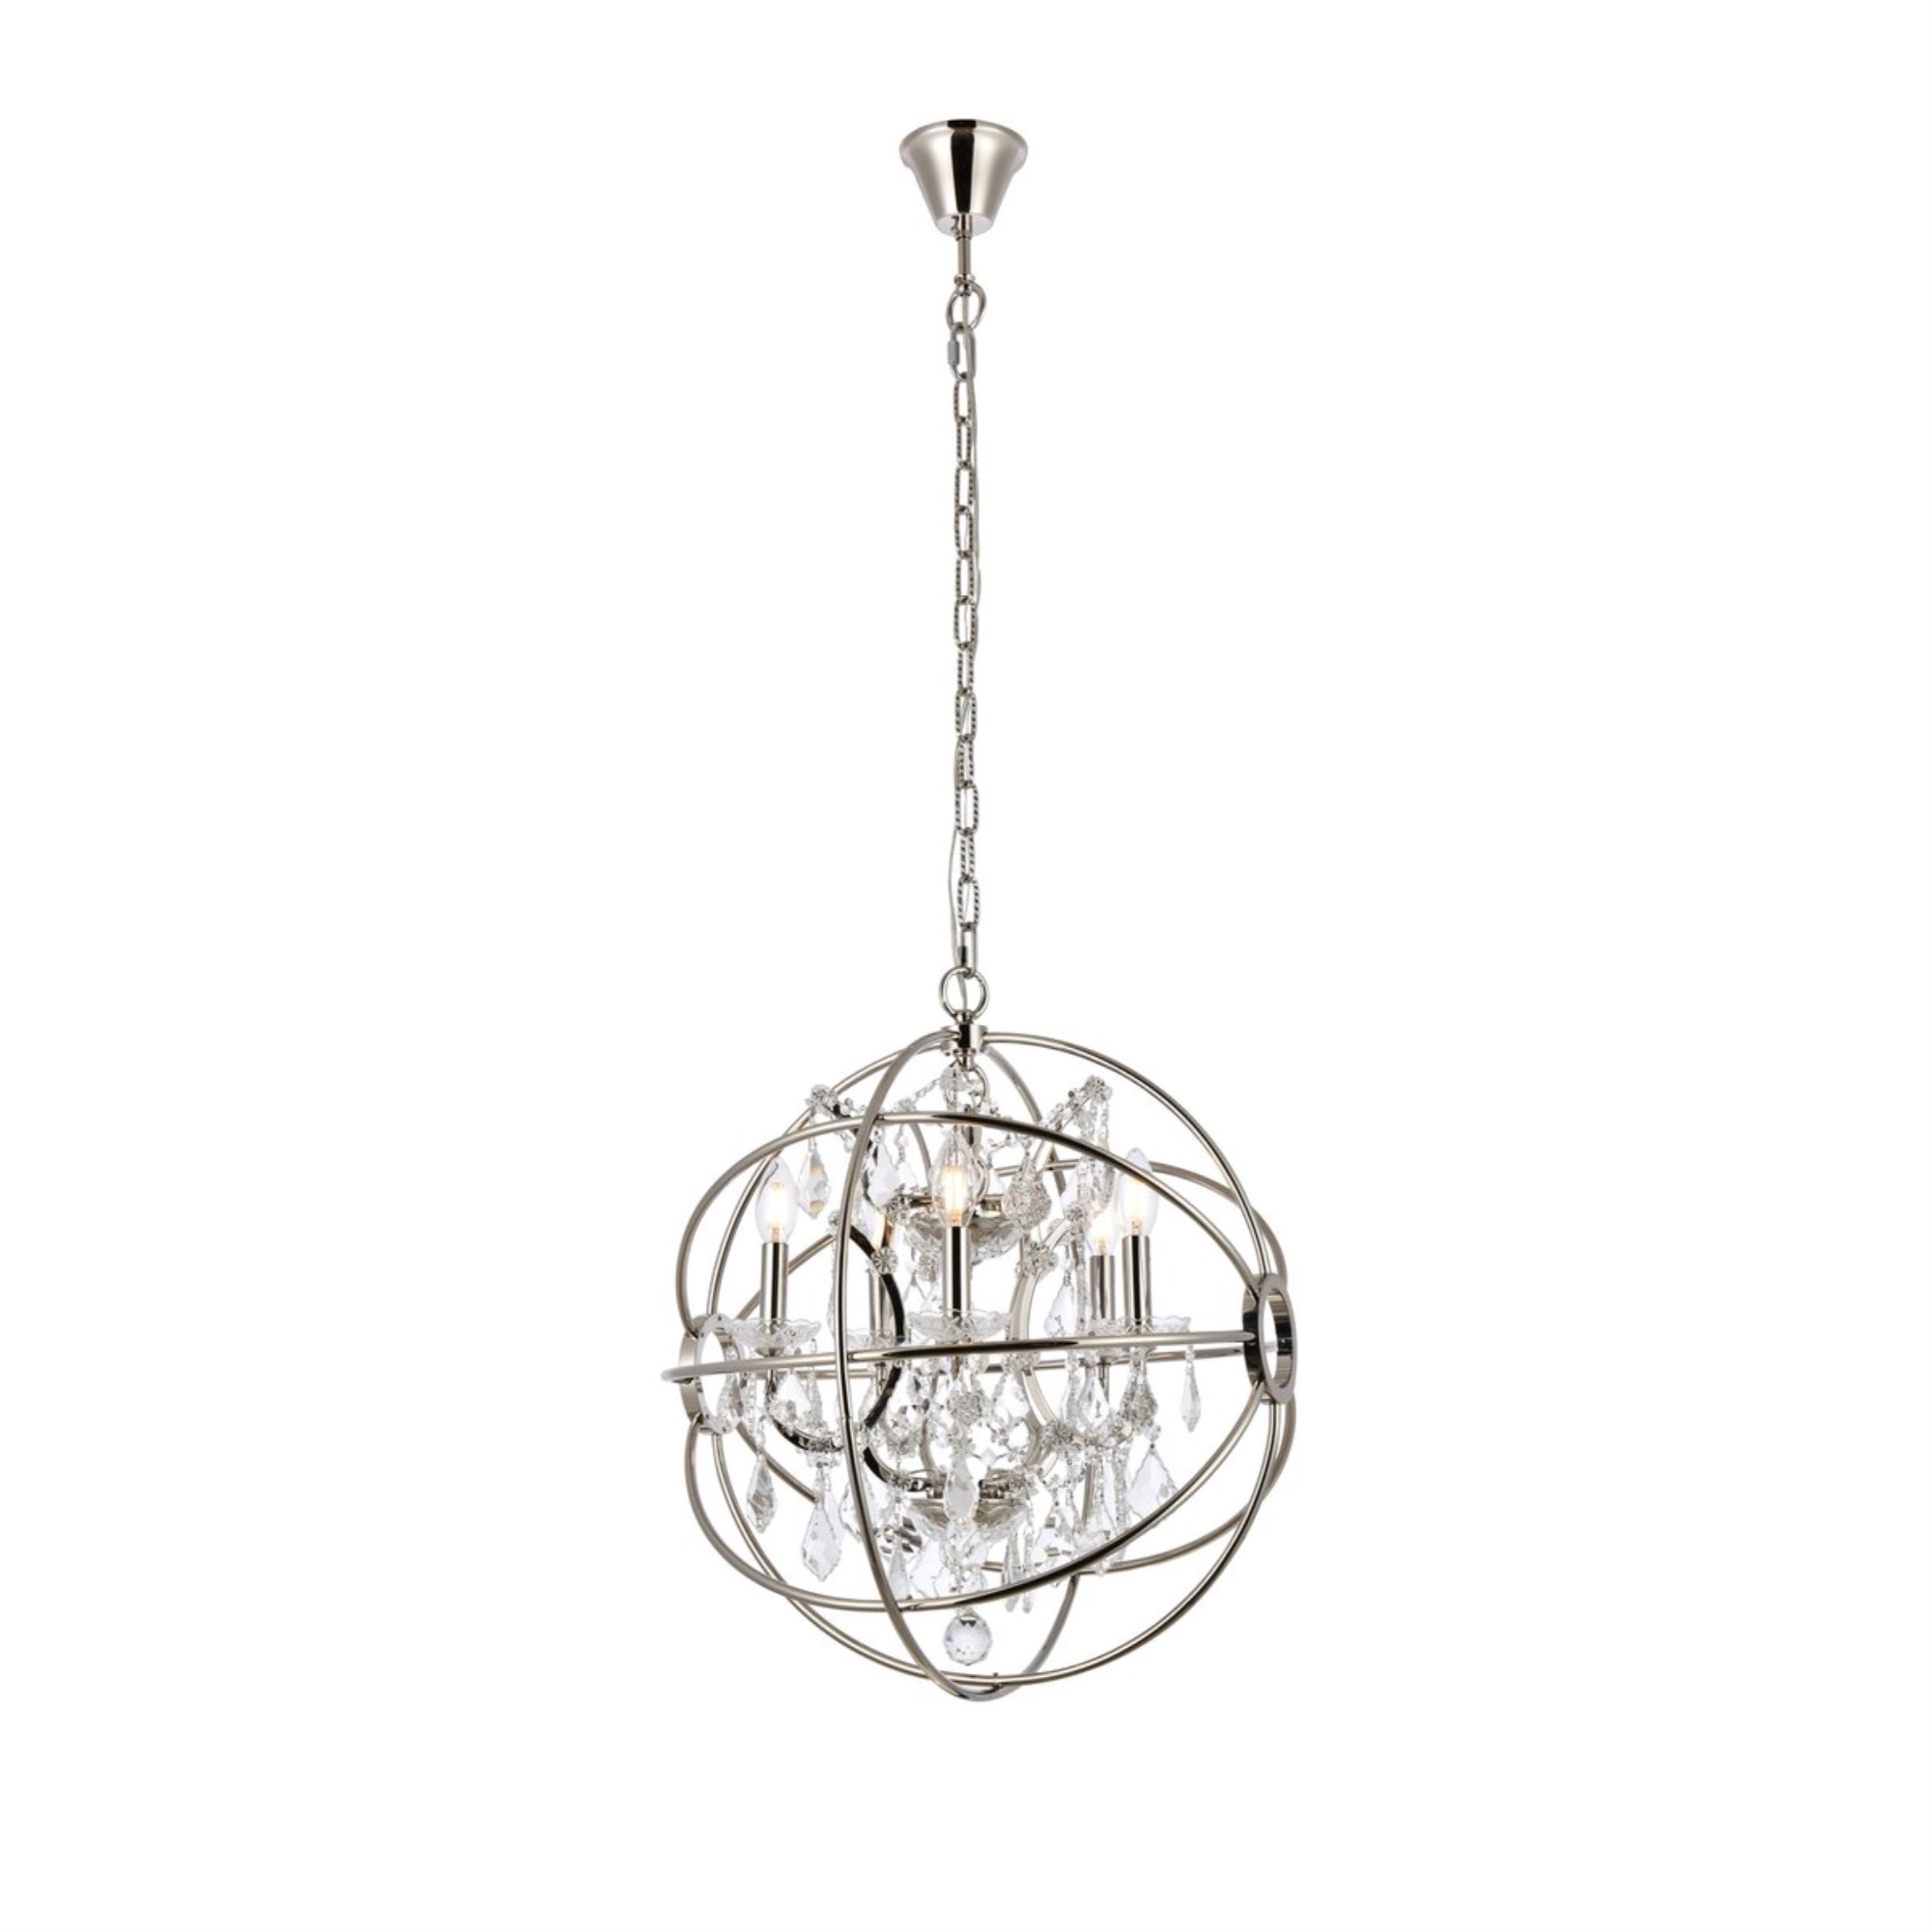 Urban Classic 1130 Geneva Collection Pendent lamp D:20" H:23" Lt:5 Polished nickel Finish (Royal Cut  Crystals)